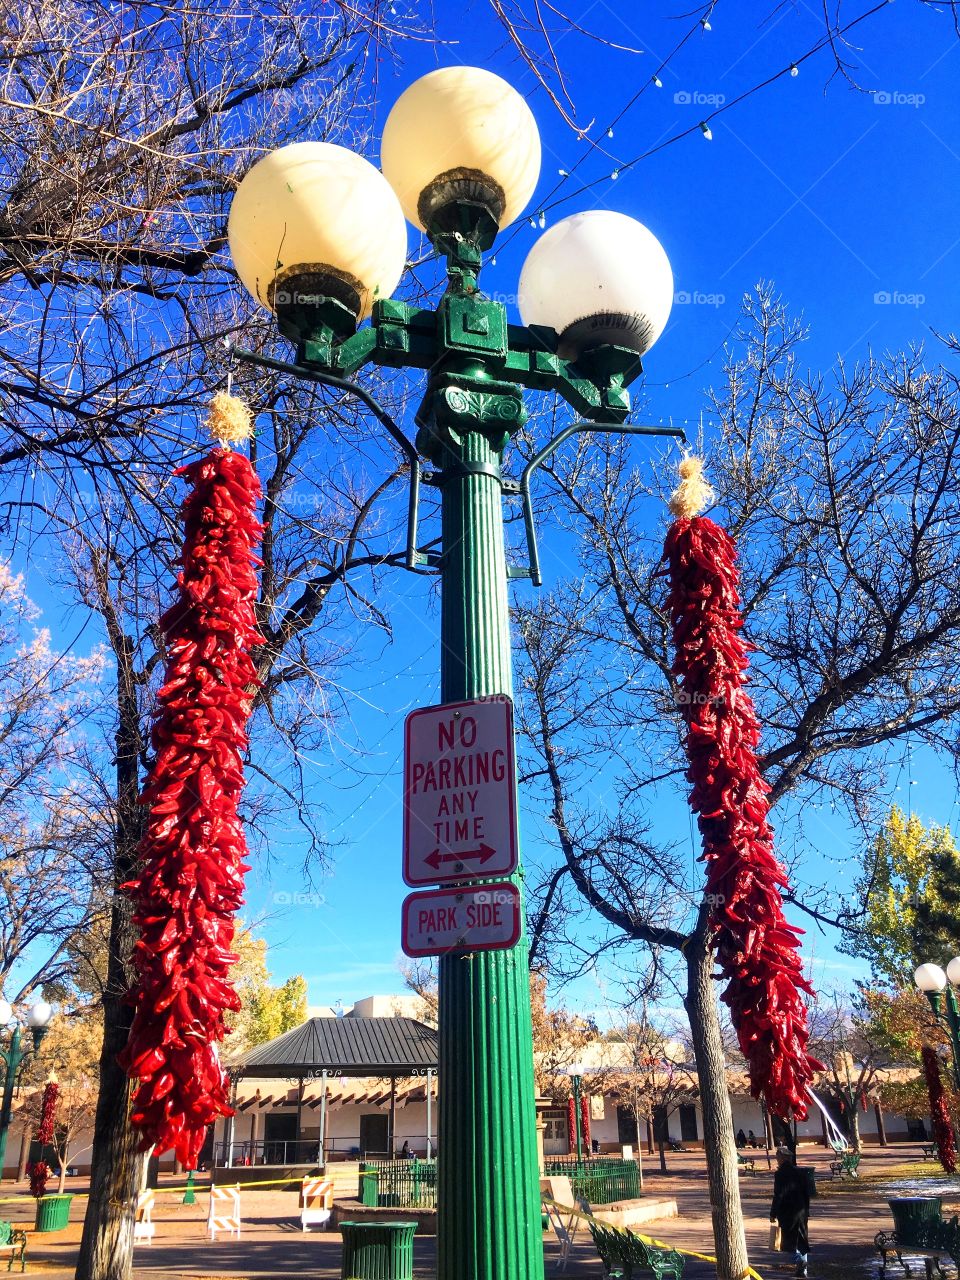 red pepper hanging on the green street lamp